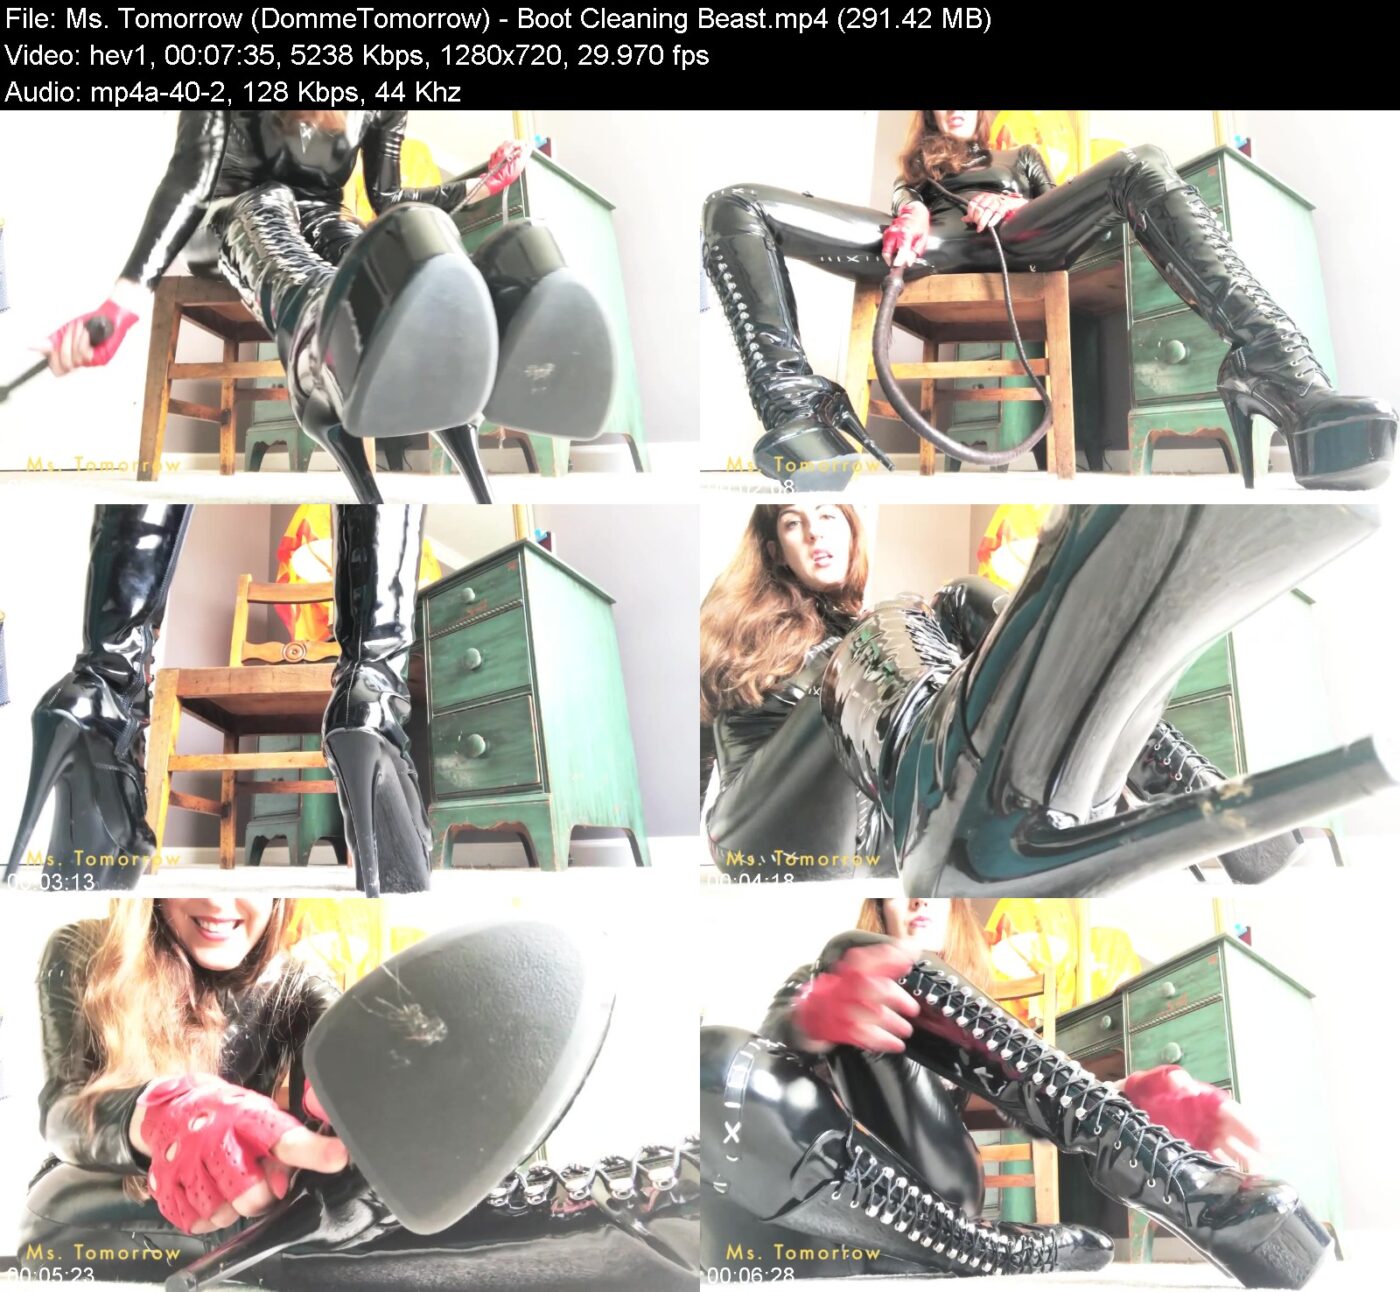 Ms. Tomorrow (DommeTomorrow) in Boot Cleaning Beast